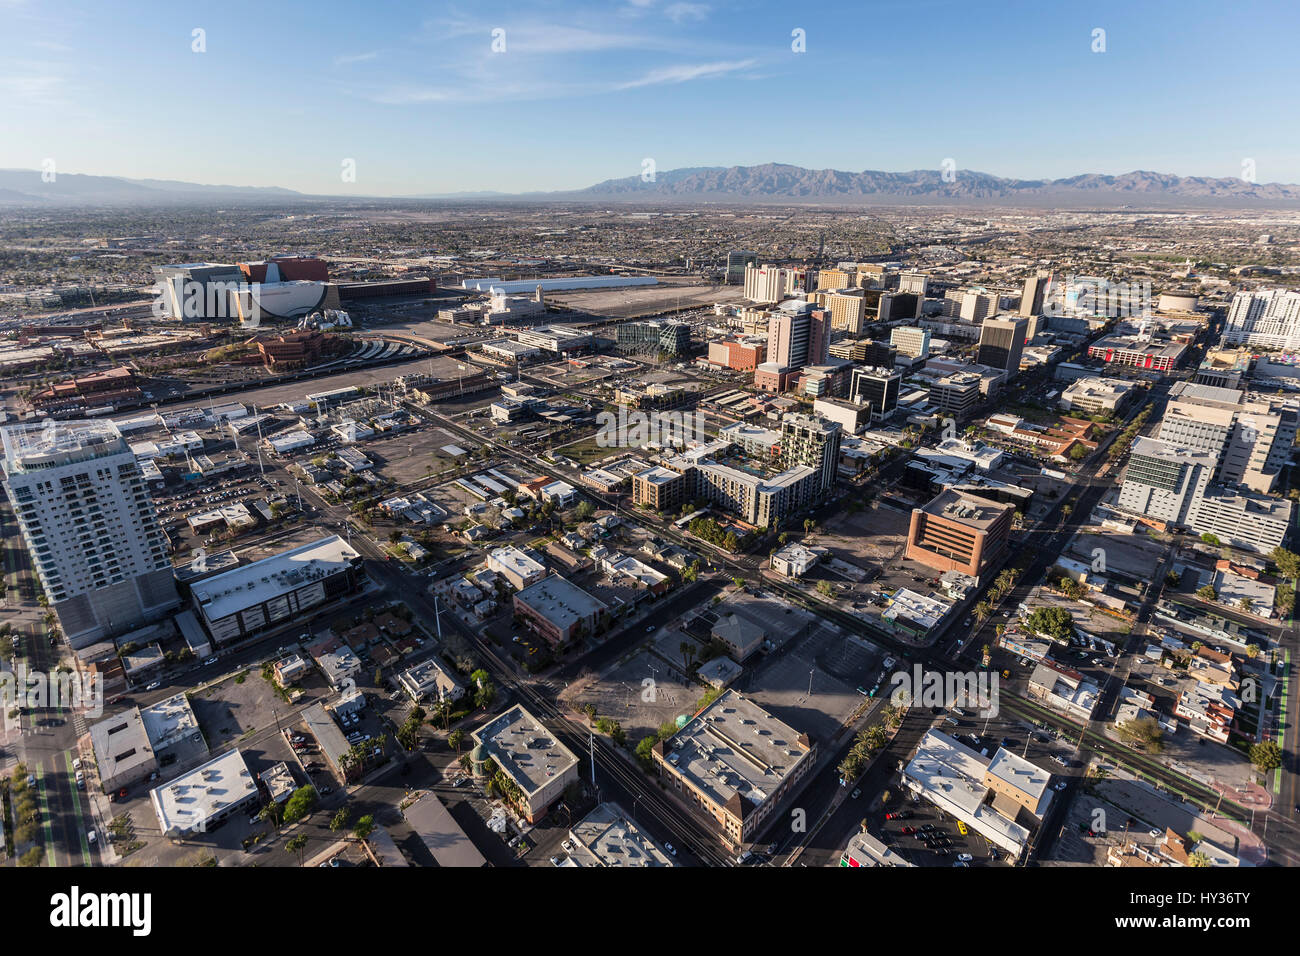 Las Vegas, Nevada, USA - March 13, 2017:  Aerial view of downtown buildings and streets. Stock Photo